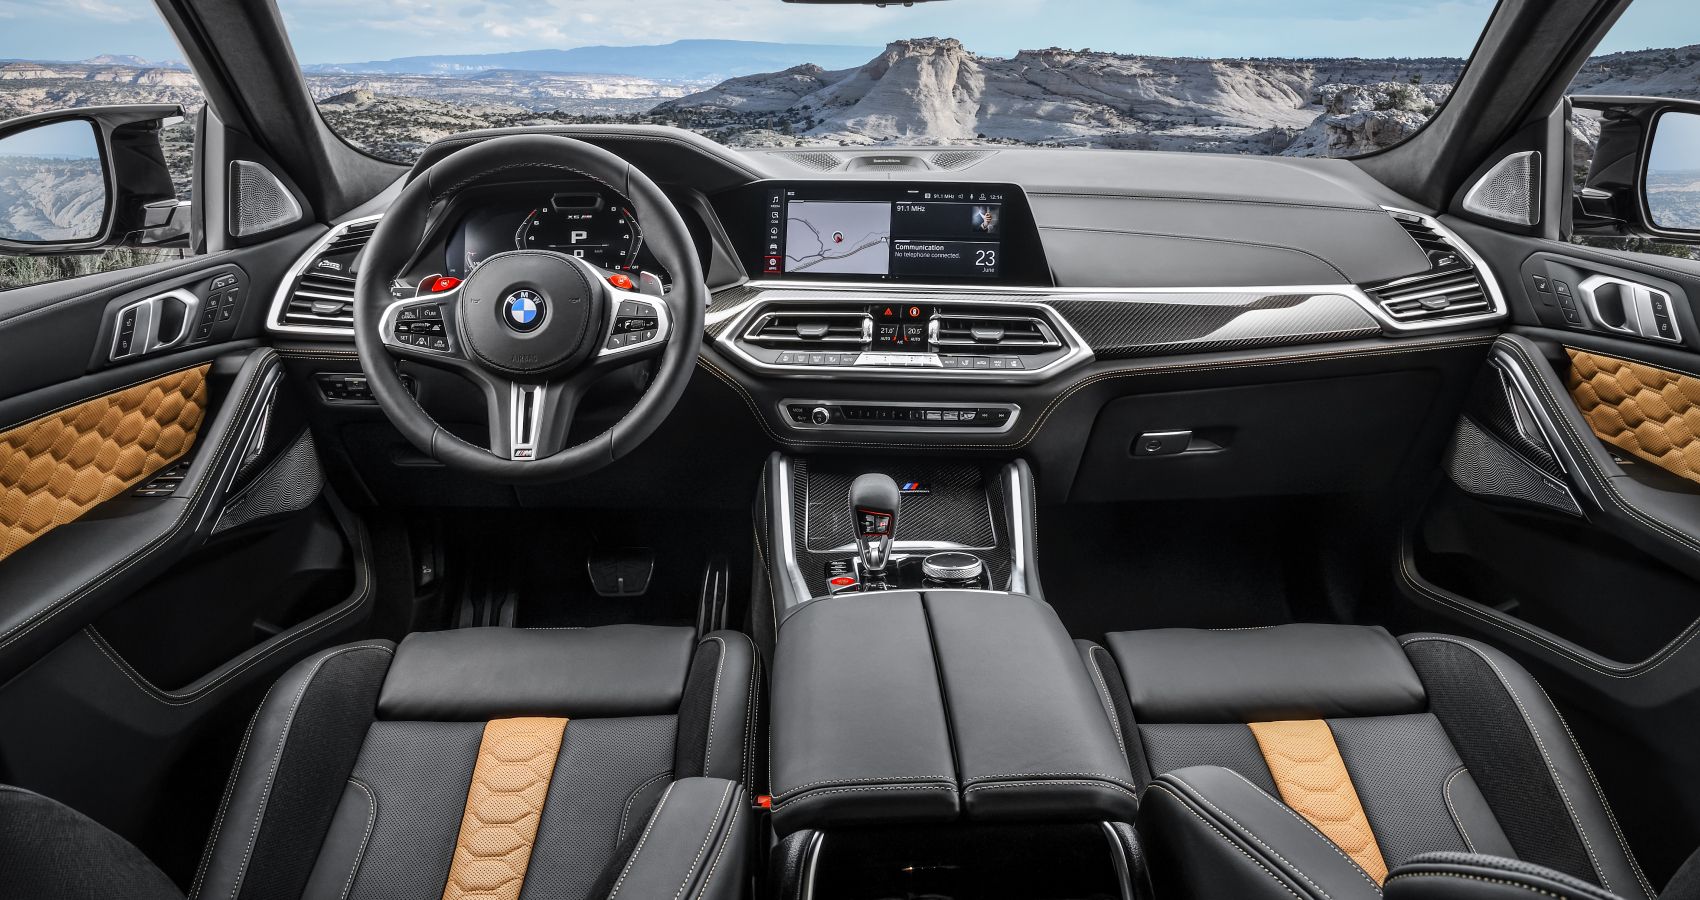 Beautfully crafted cabin of 2022 BMW X6 M Inteior 